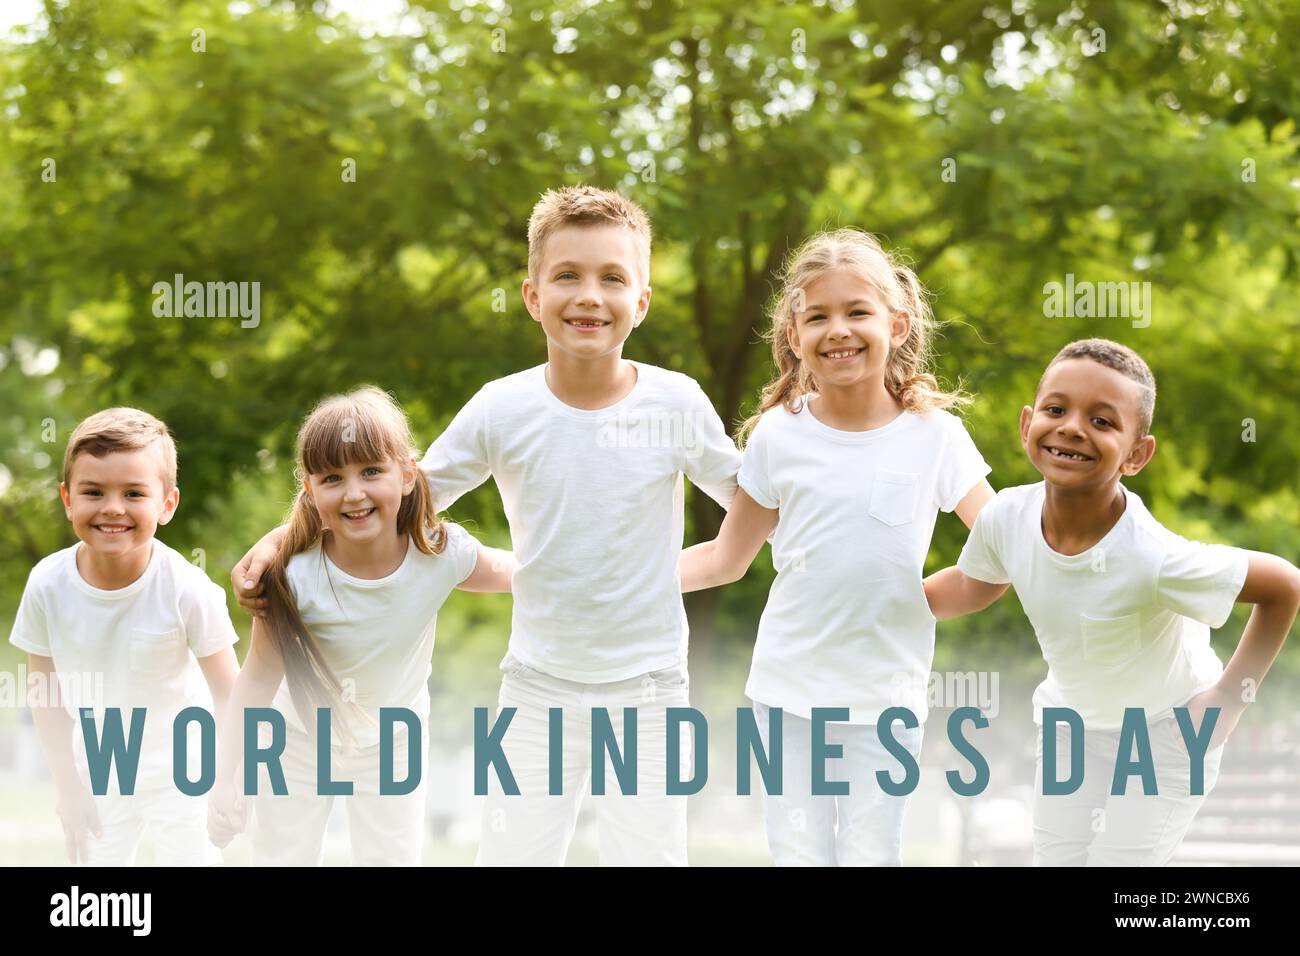 World Kindness Day. Group of happy children outdoors Stock Photo